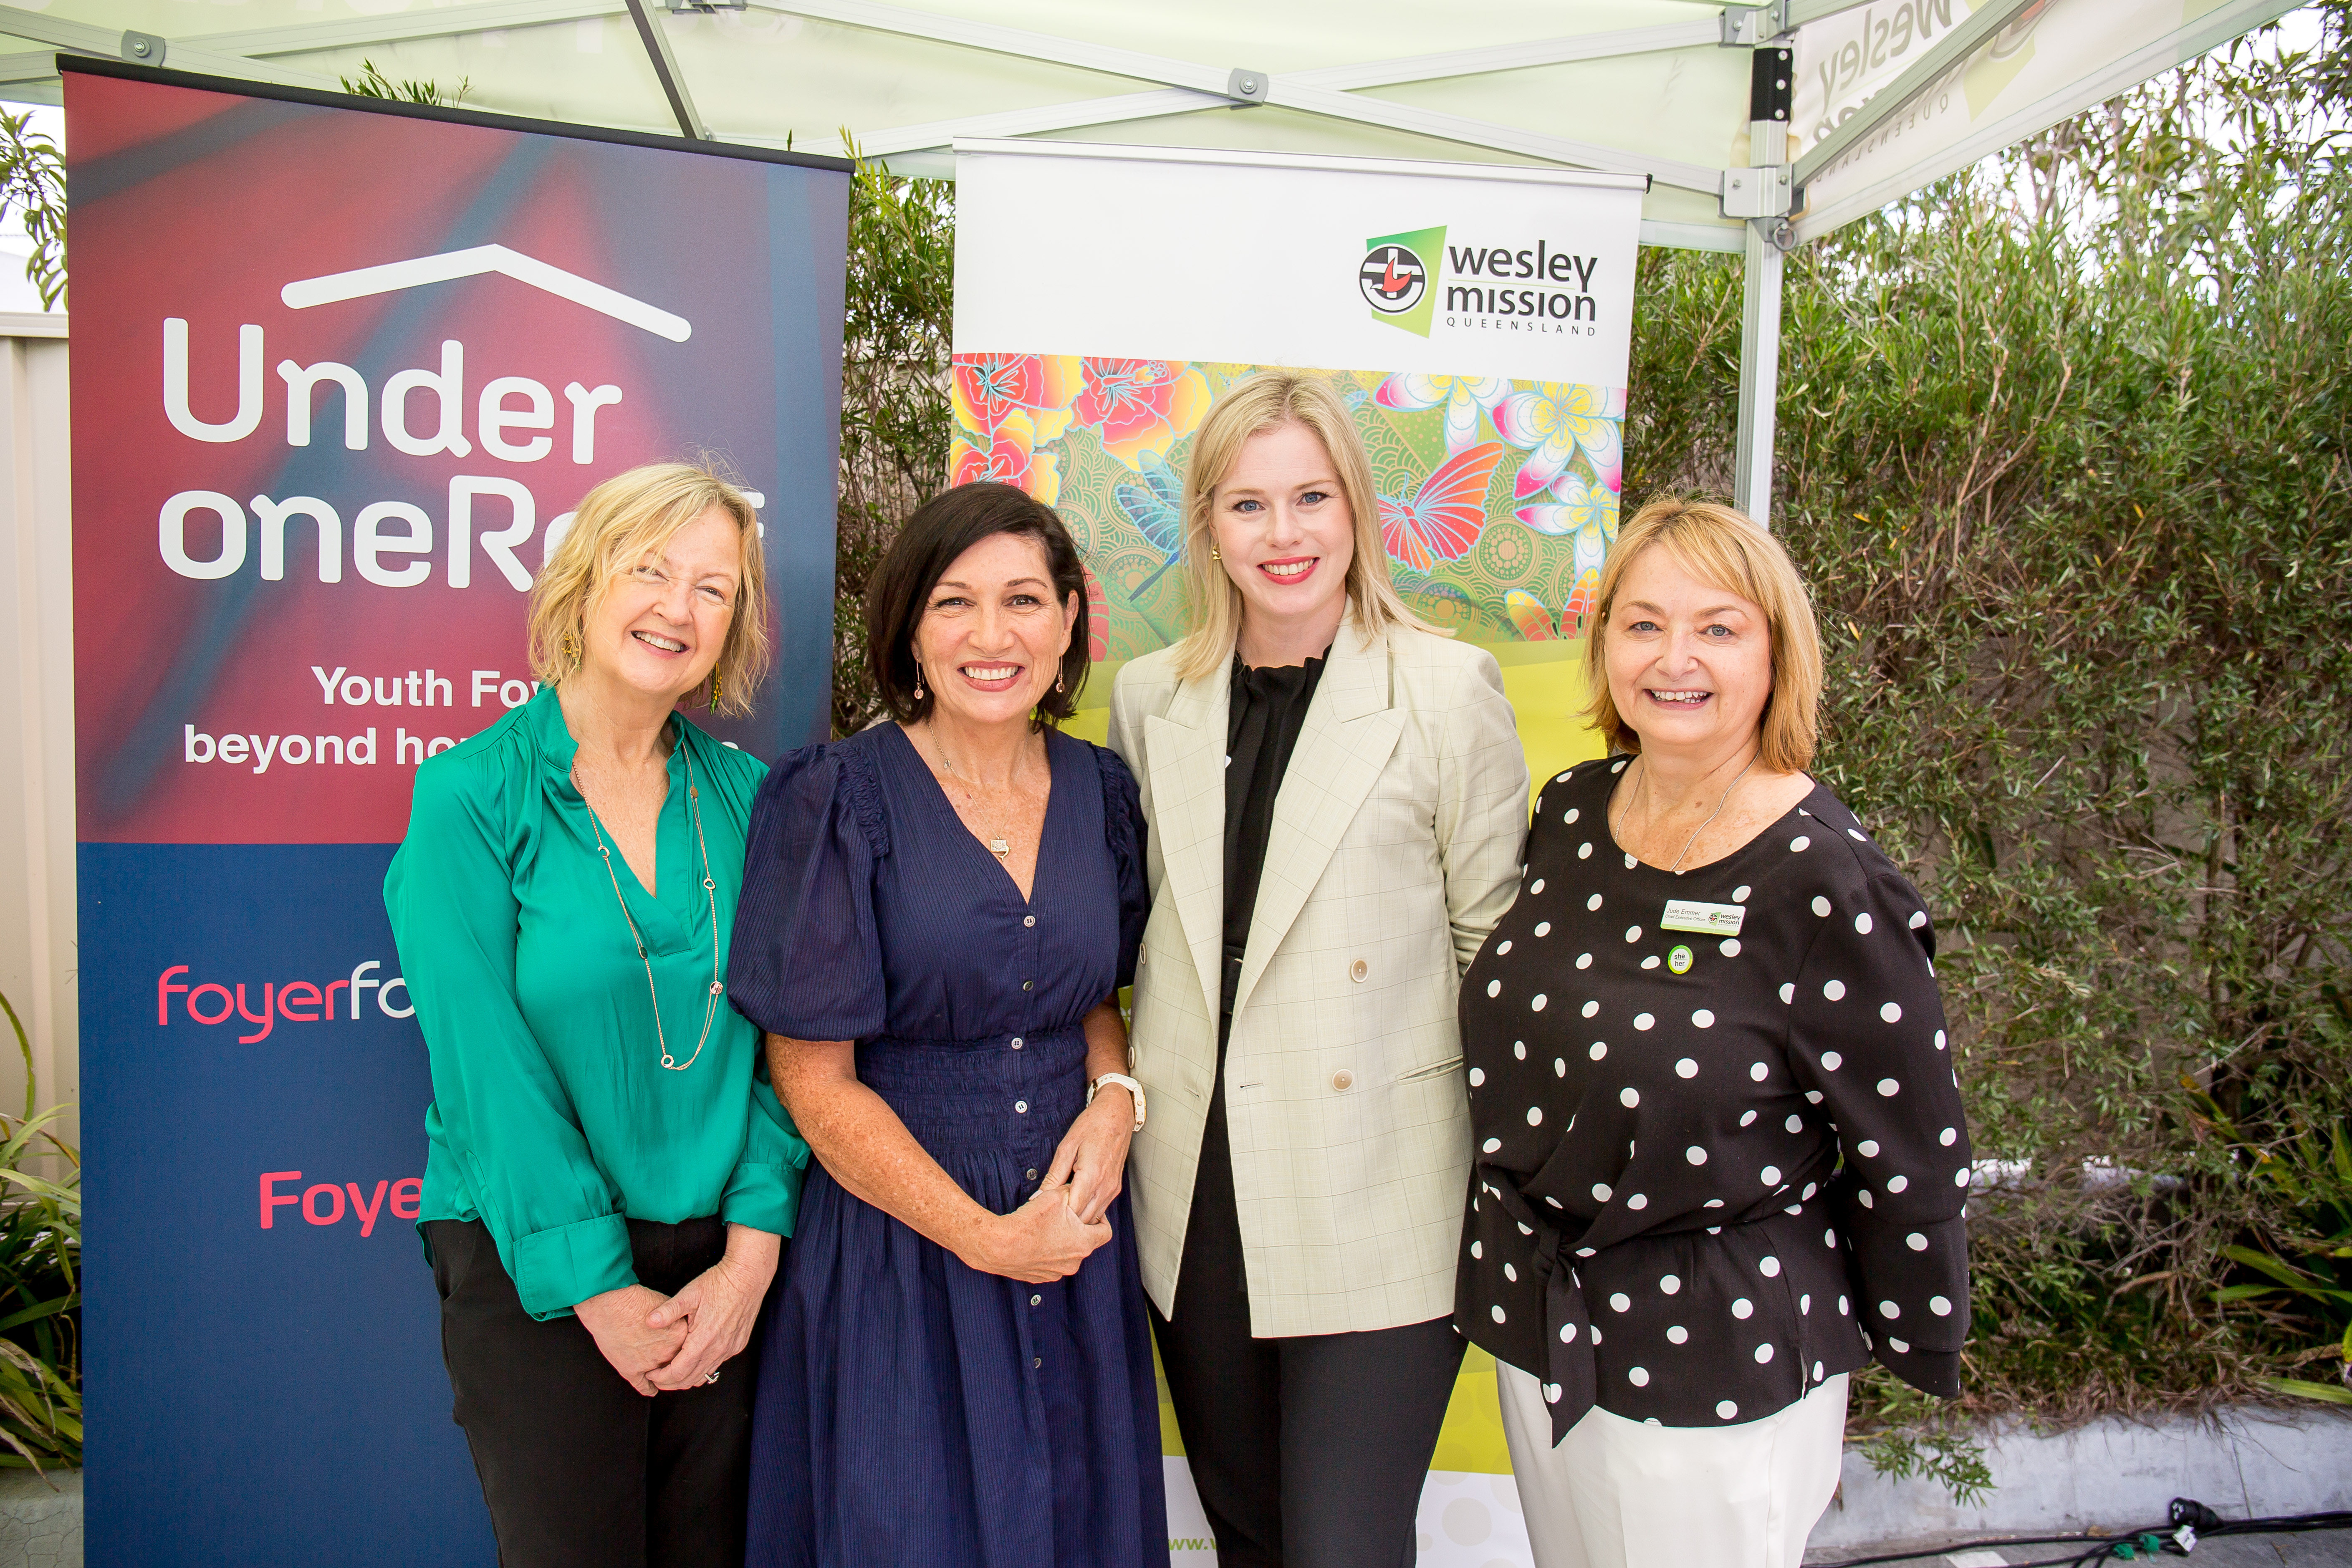 Four middle aged women standing in front of two pull banners outside with green shrubs in the background